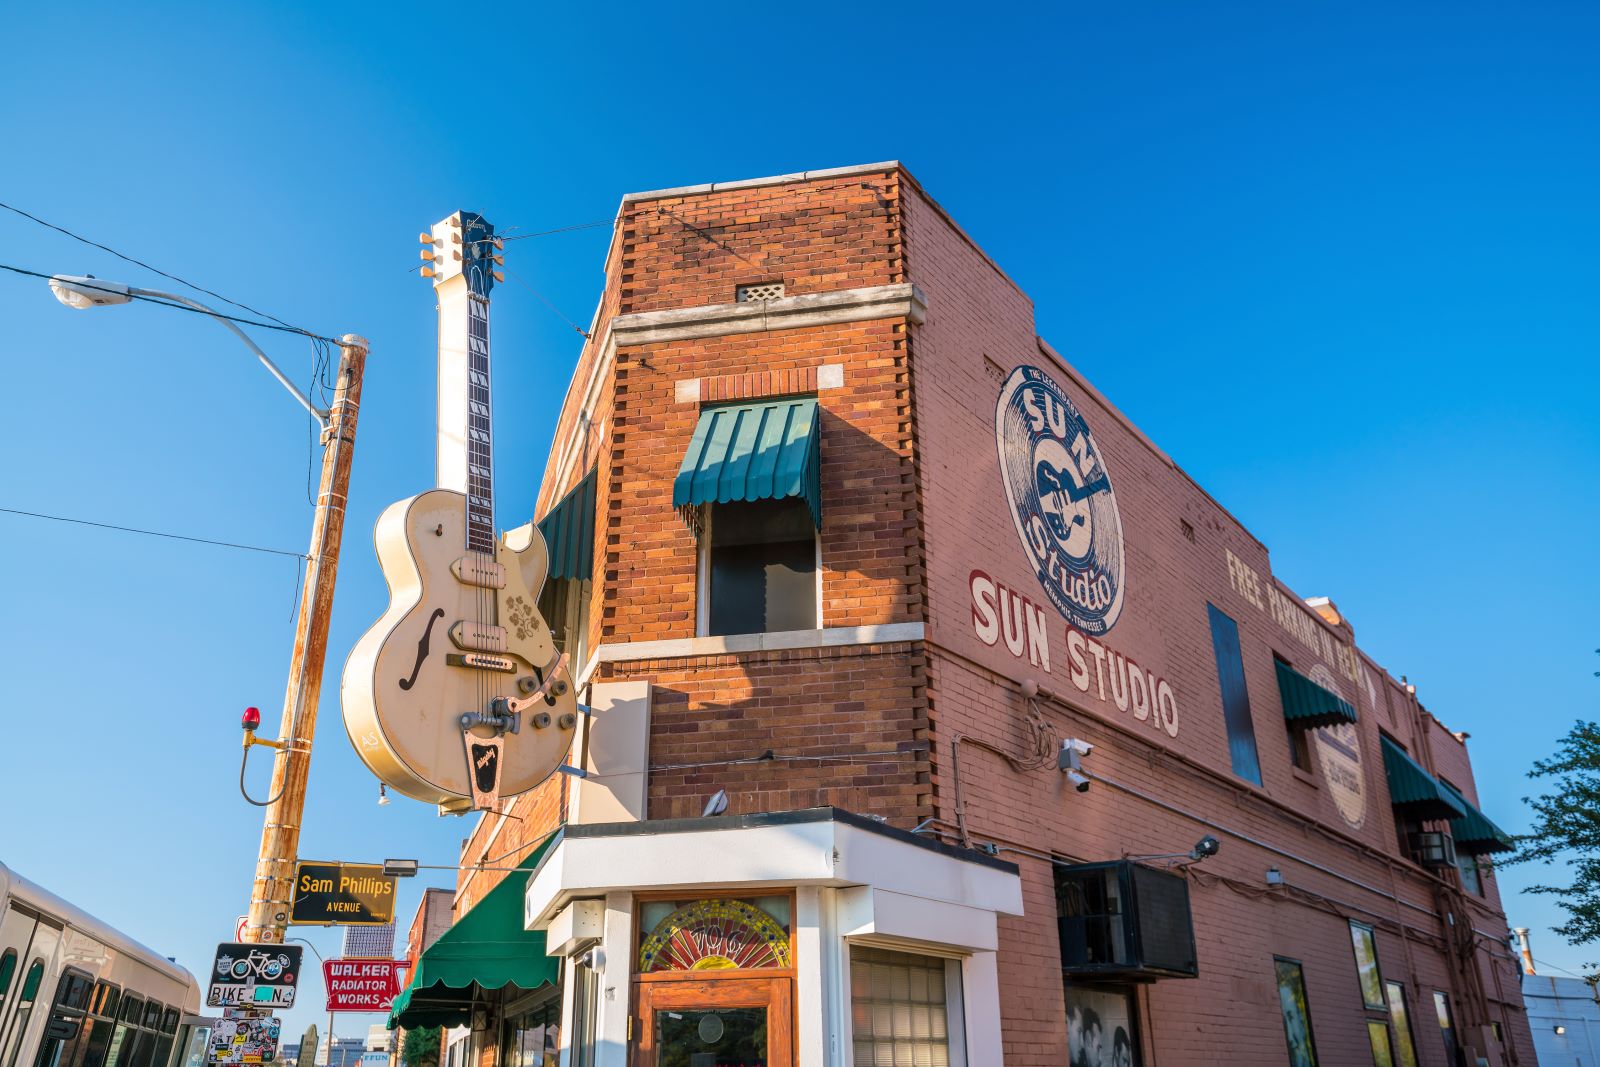 Image credit: Shutterstock / f11photo <p>Home of the blues and Elvis Presley, Memphis is rich in culture and history. A daily budget of $65 will cover meals, lodging, and attractions.</p>